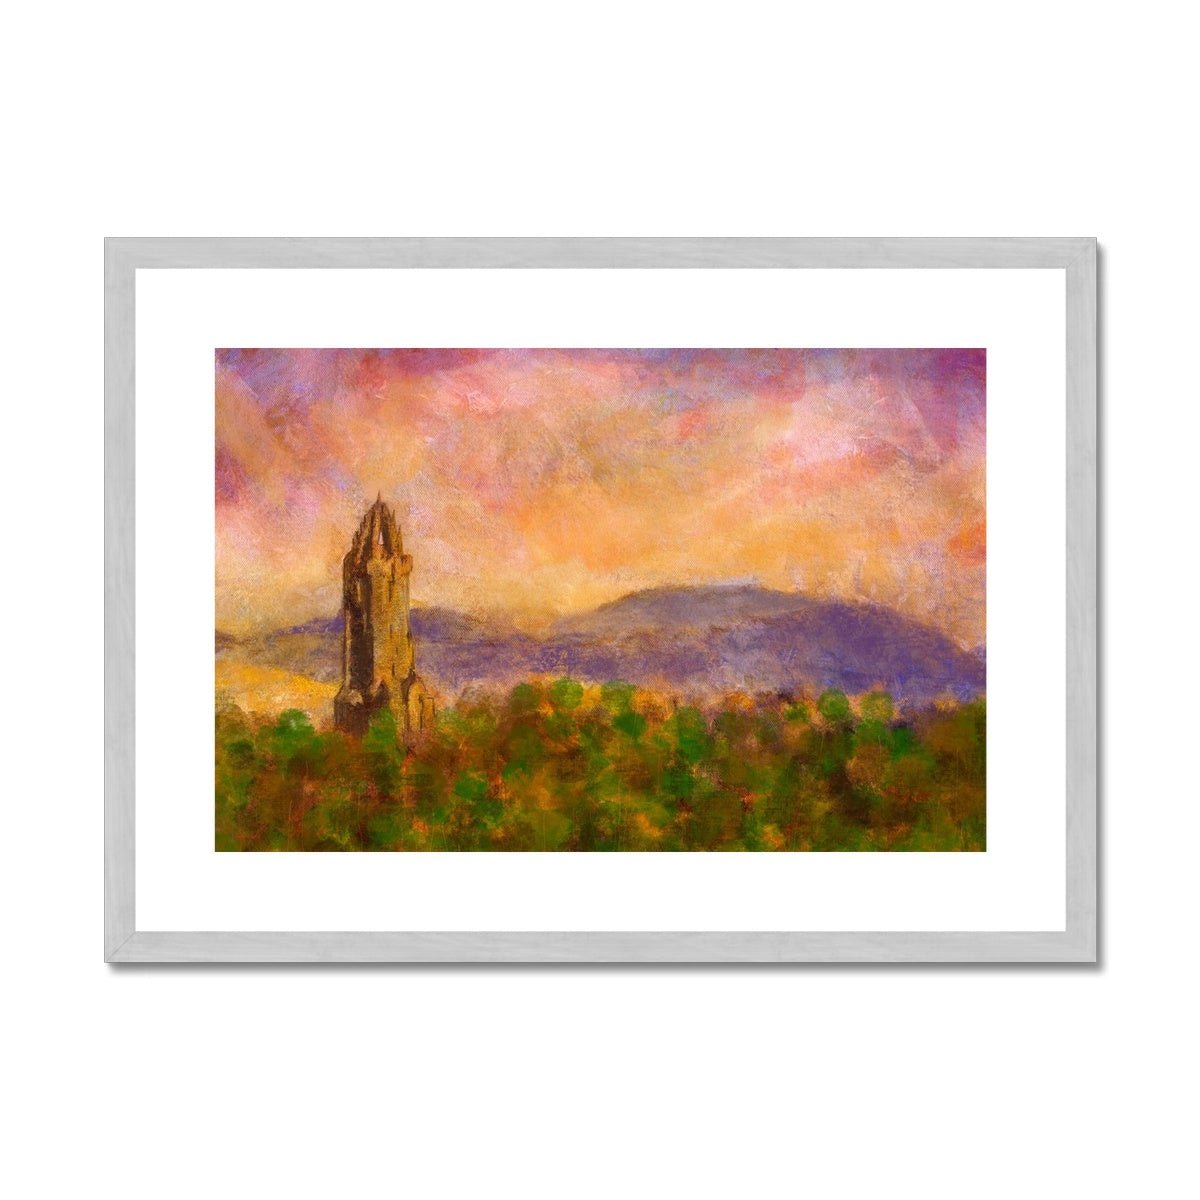 Wallace Monument Dusk Painting | Antique Framed & Mounted Prints From Scotland-Antique Framed & Mounted Prints-Historic & Iconic Scotland Art Gallery-A2 Landscape-Silver Frame-Paintings, Prints, Homeware, Art Gifts From Scotland By Scottish Artist Kevin Hunter